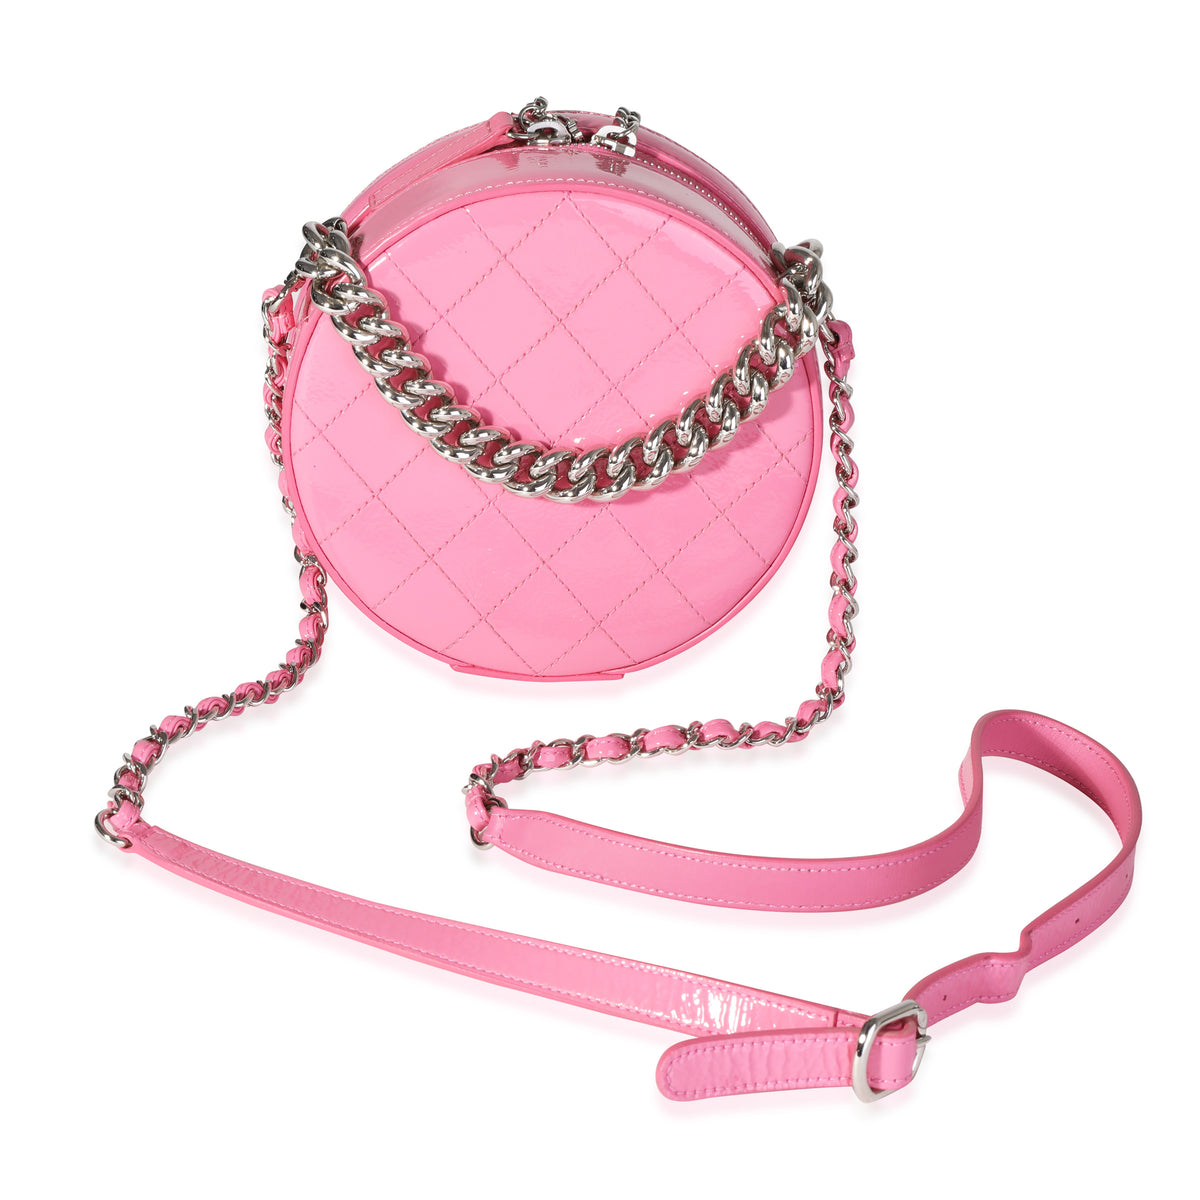 Chanel Pink Patent Leather Round As Earth Crossbody